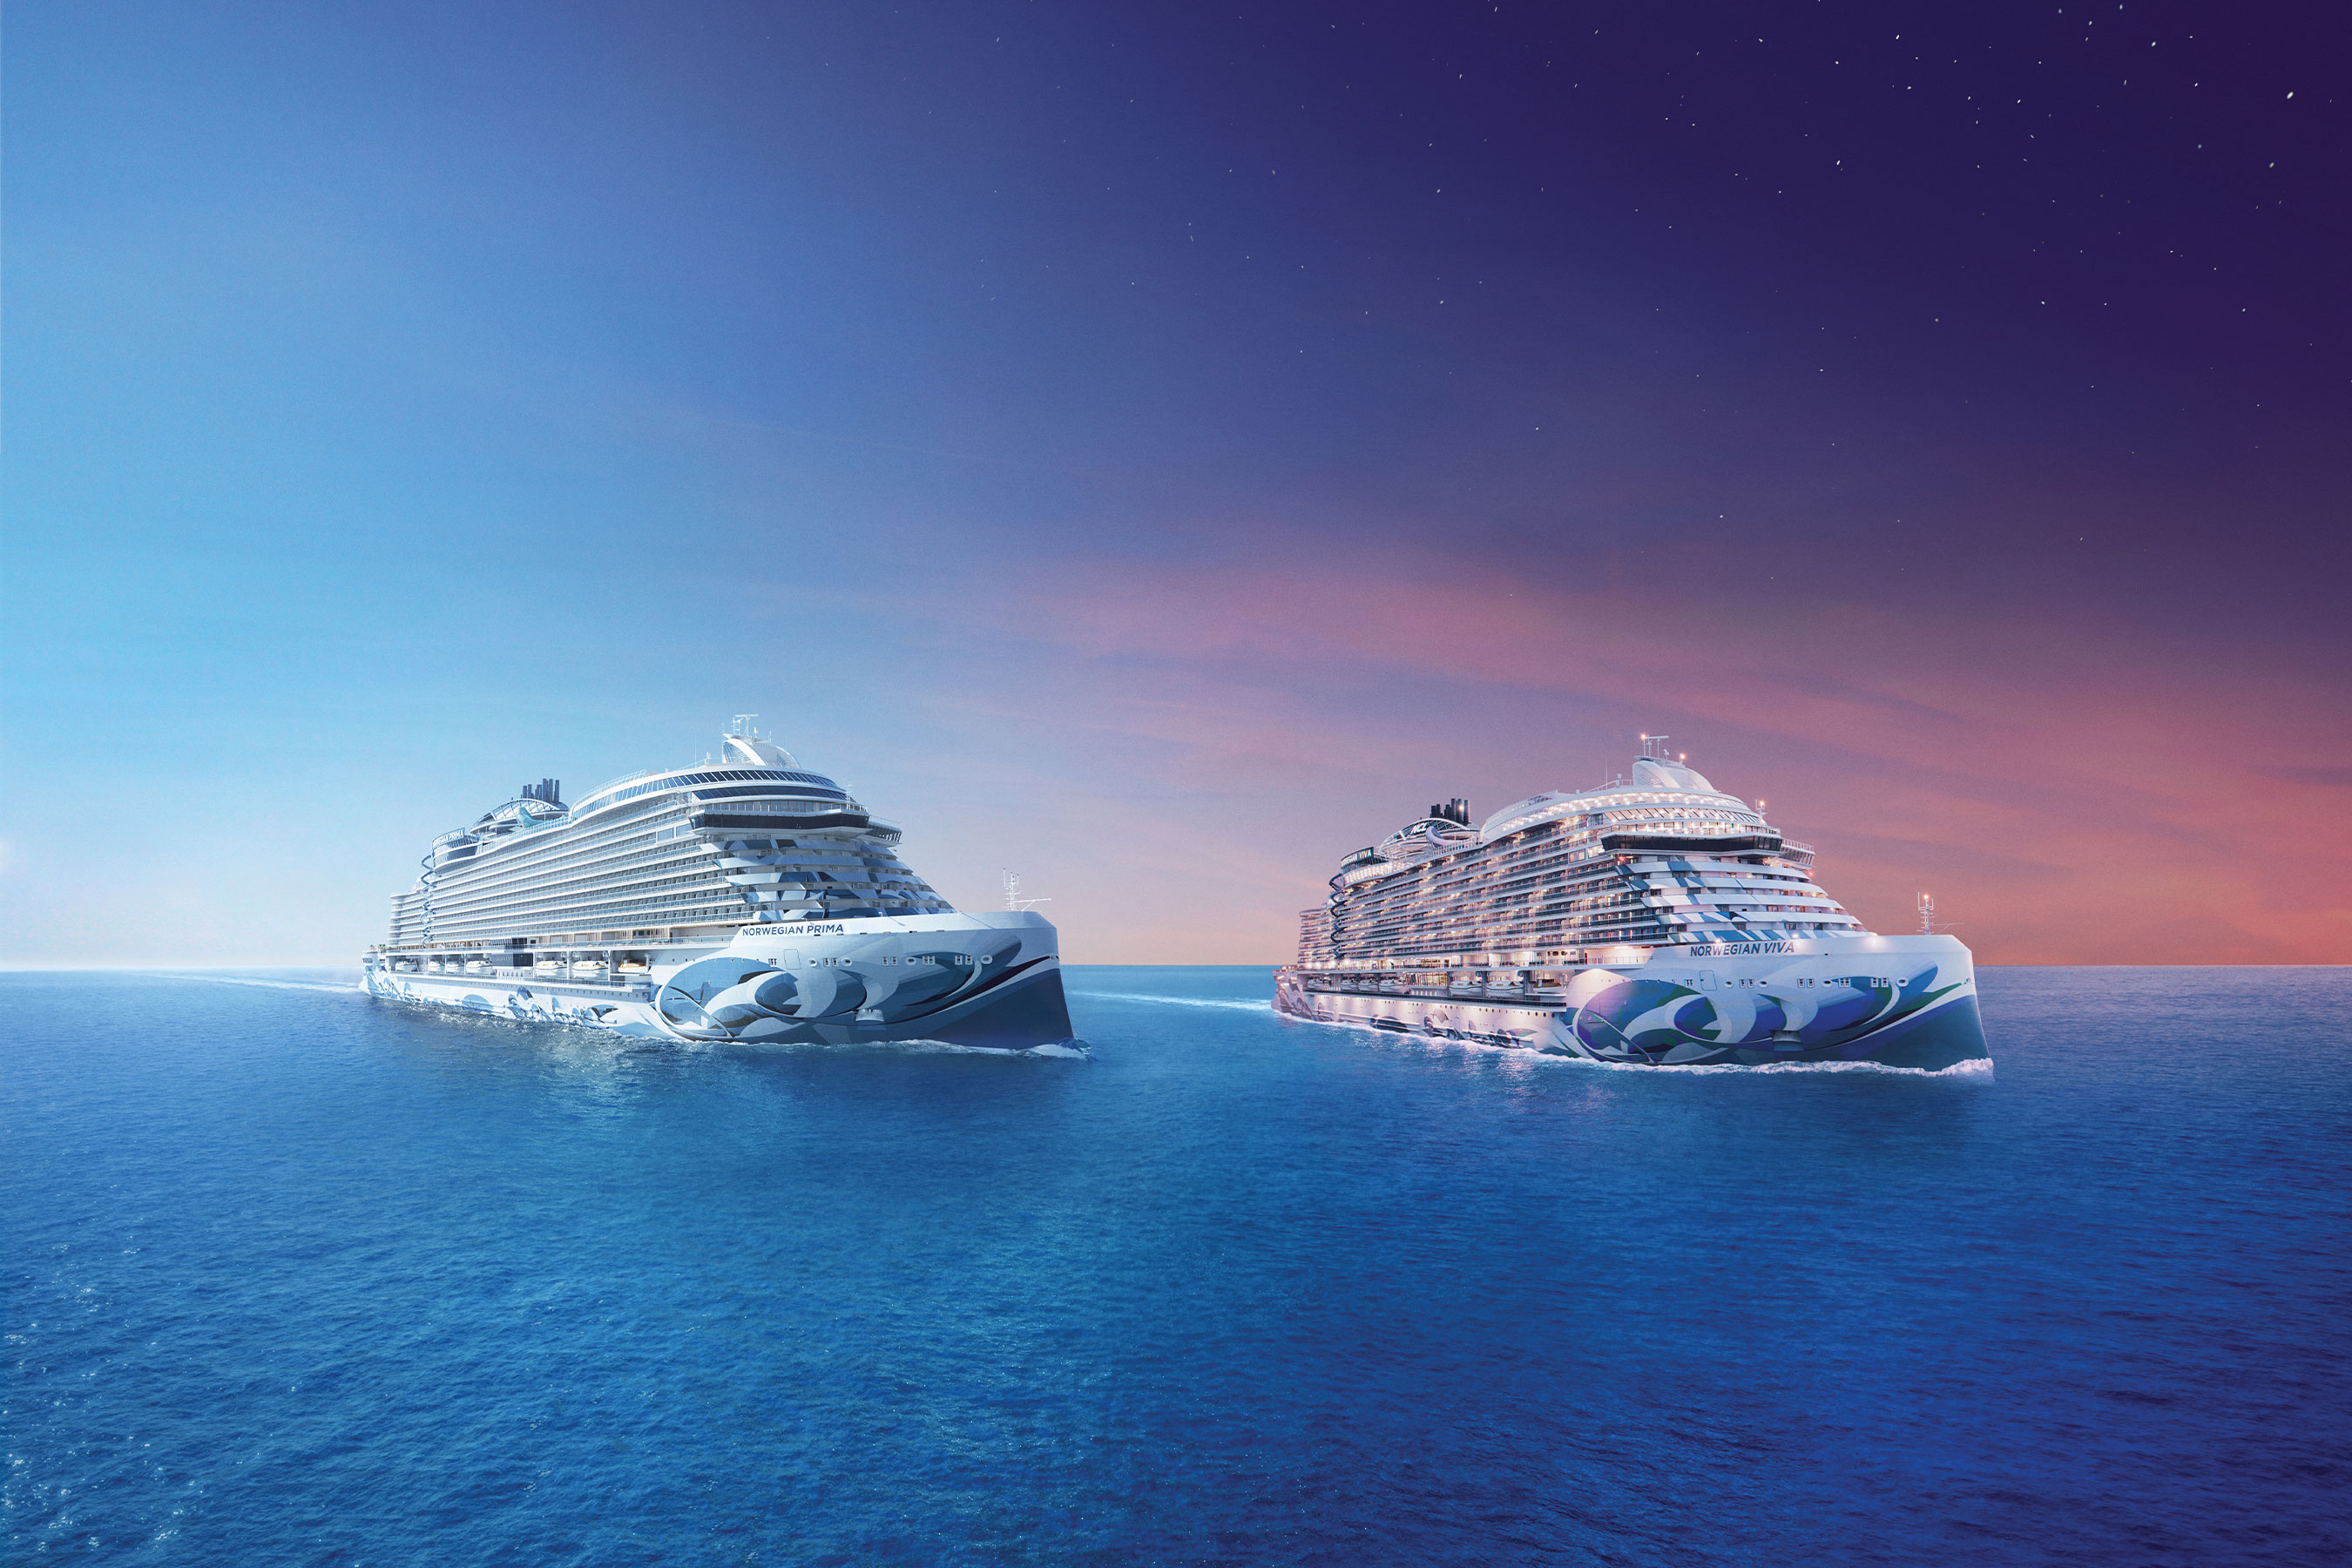 Norwegian Cruise Line unveils nine new food and beverage concepts for Norwegian Prima and Norwegian Viva, including the first sustainably-focused cocktail and wine bar and debuts the Company’s first three-level atrium.